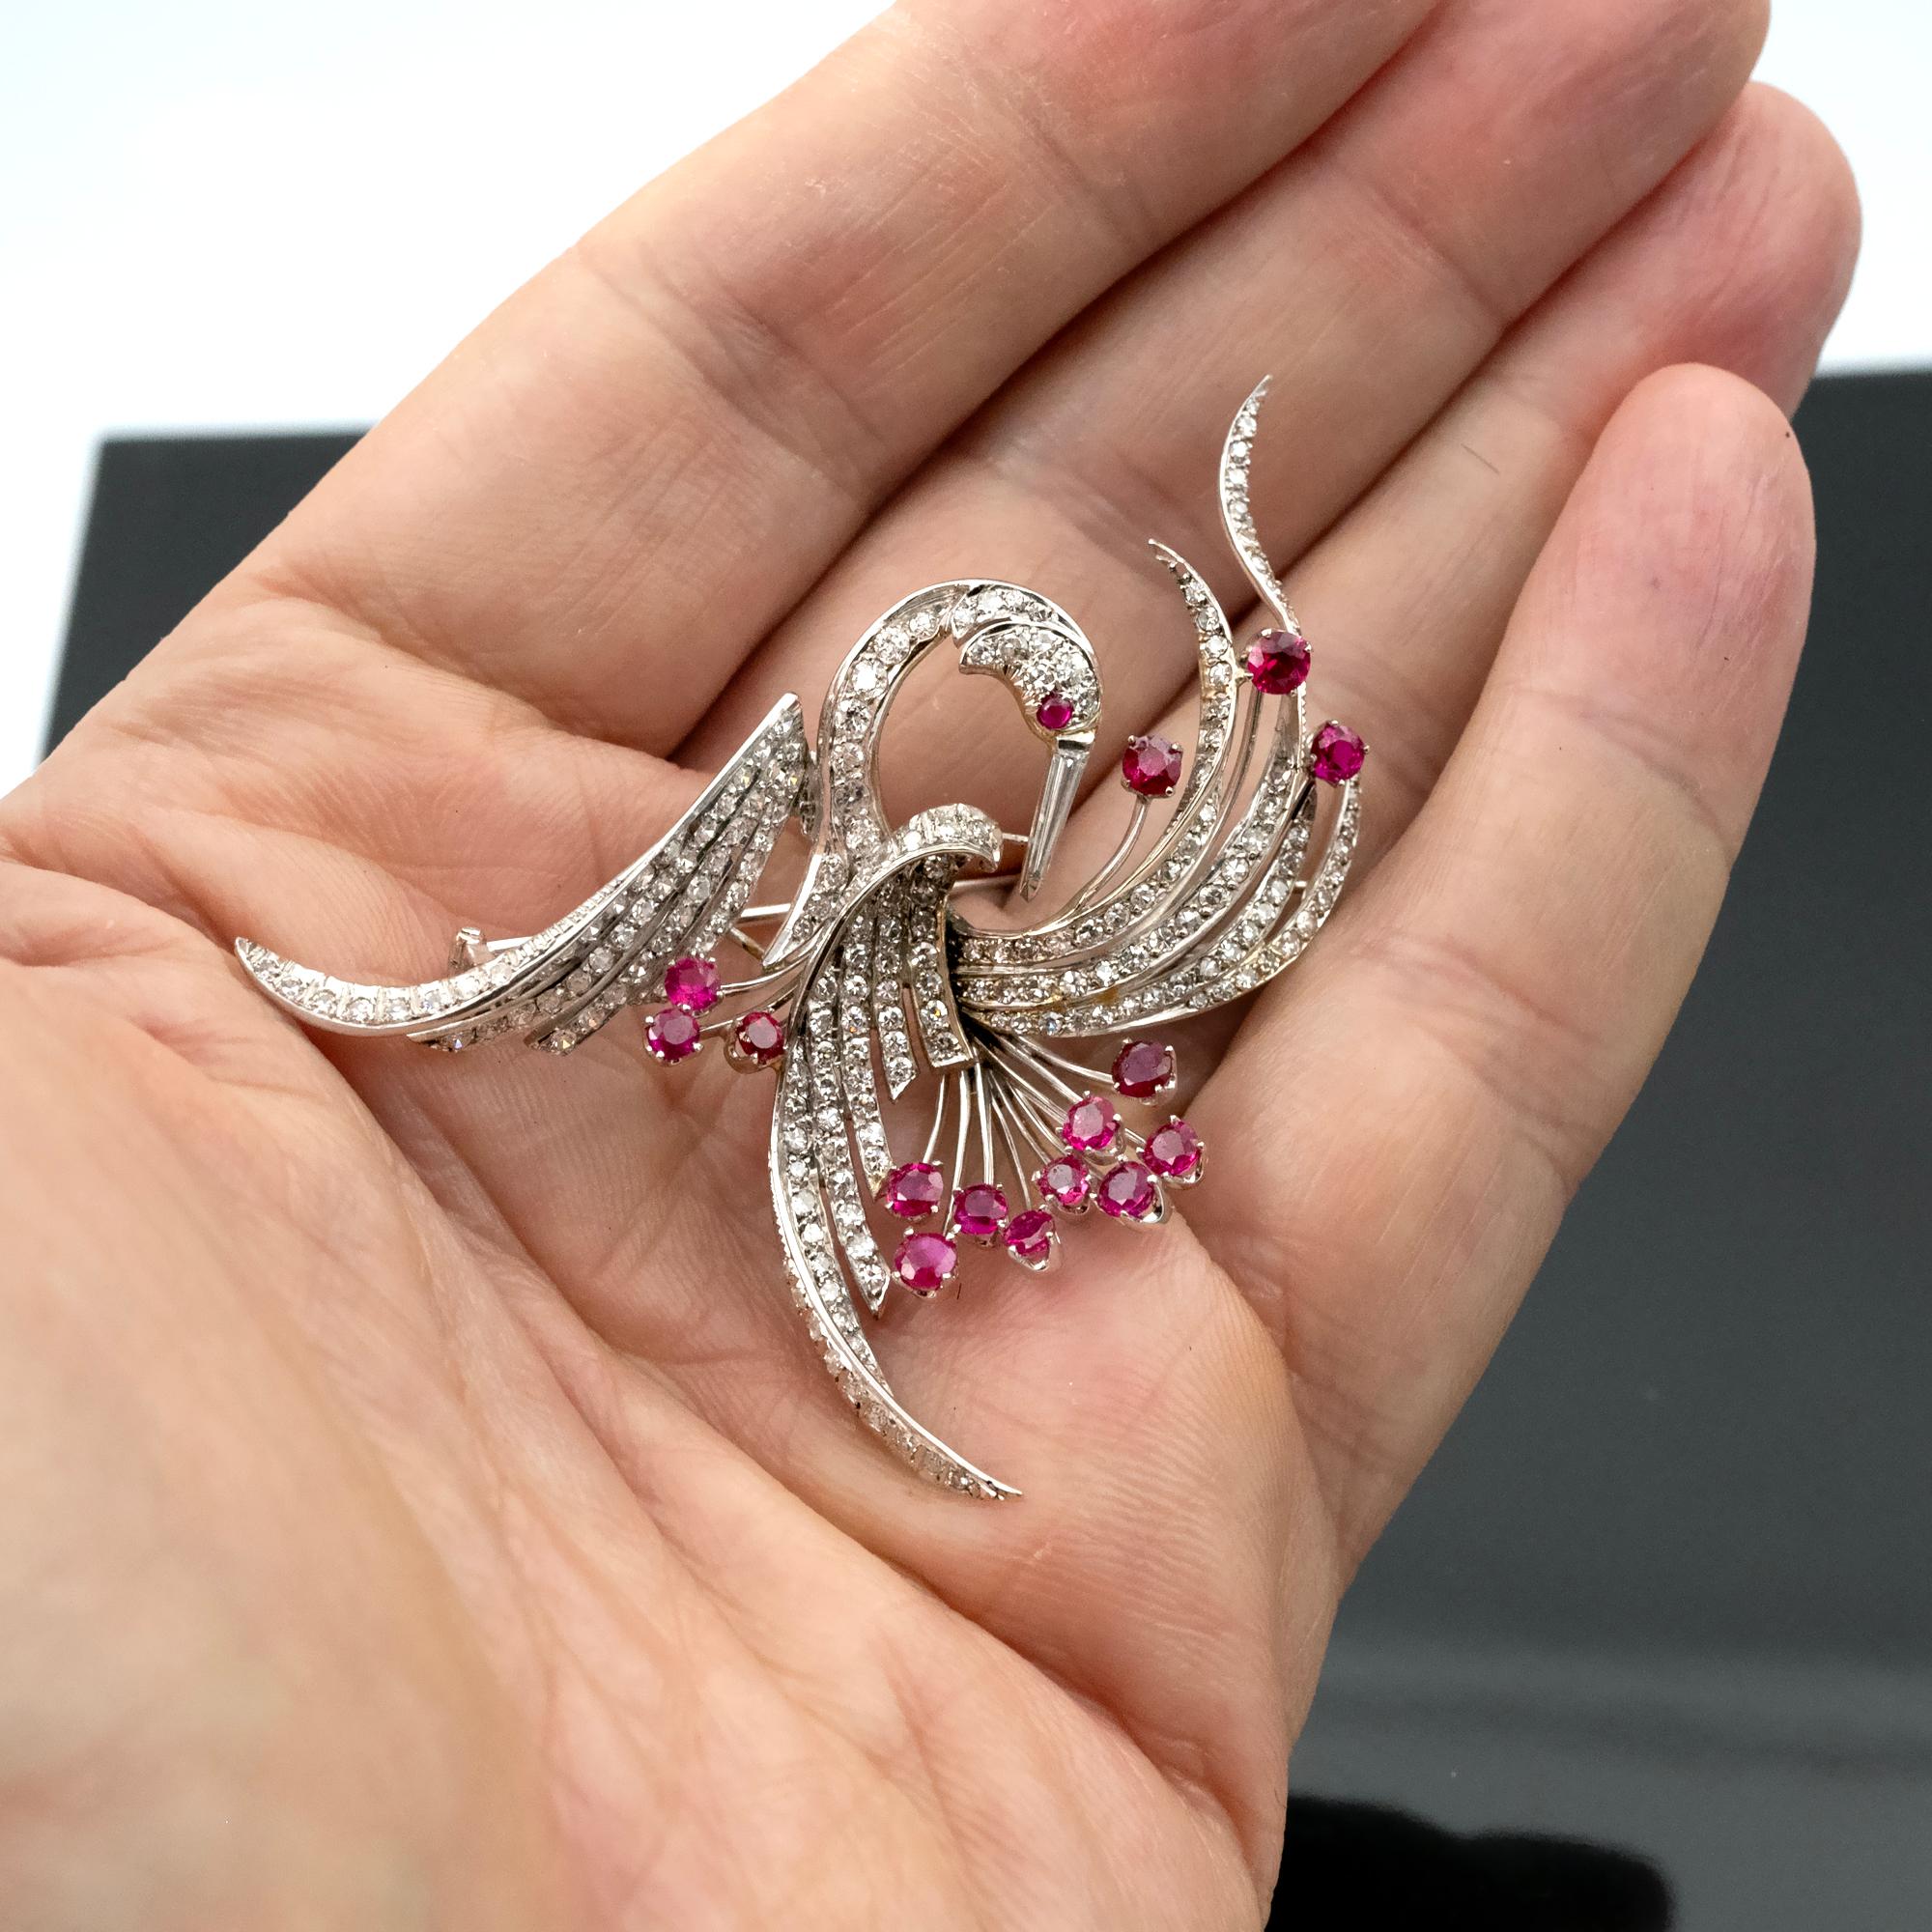 Women's Mid-20th Century White Gold Bird Brooch with Pavé Diamonds and Ruby Accents For Sale